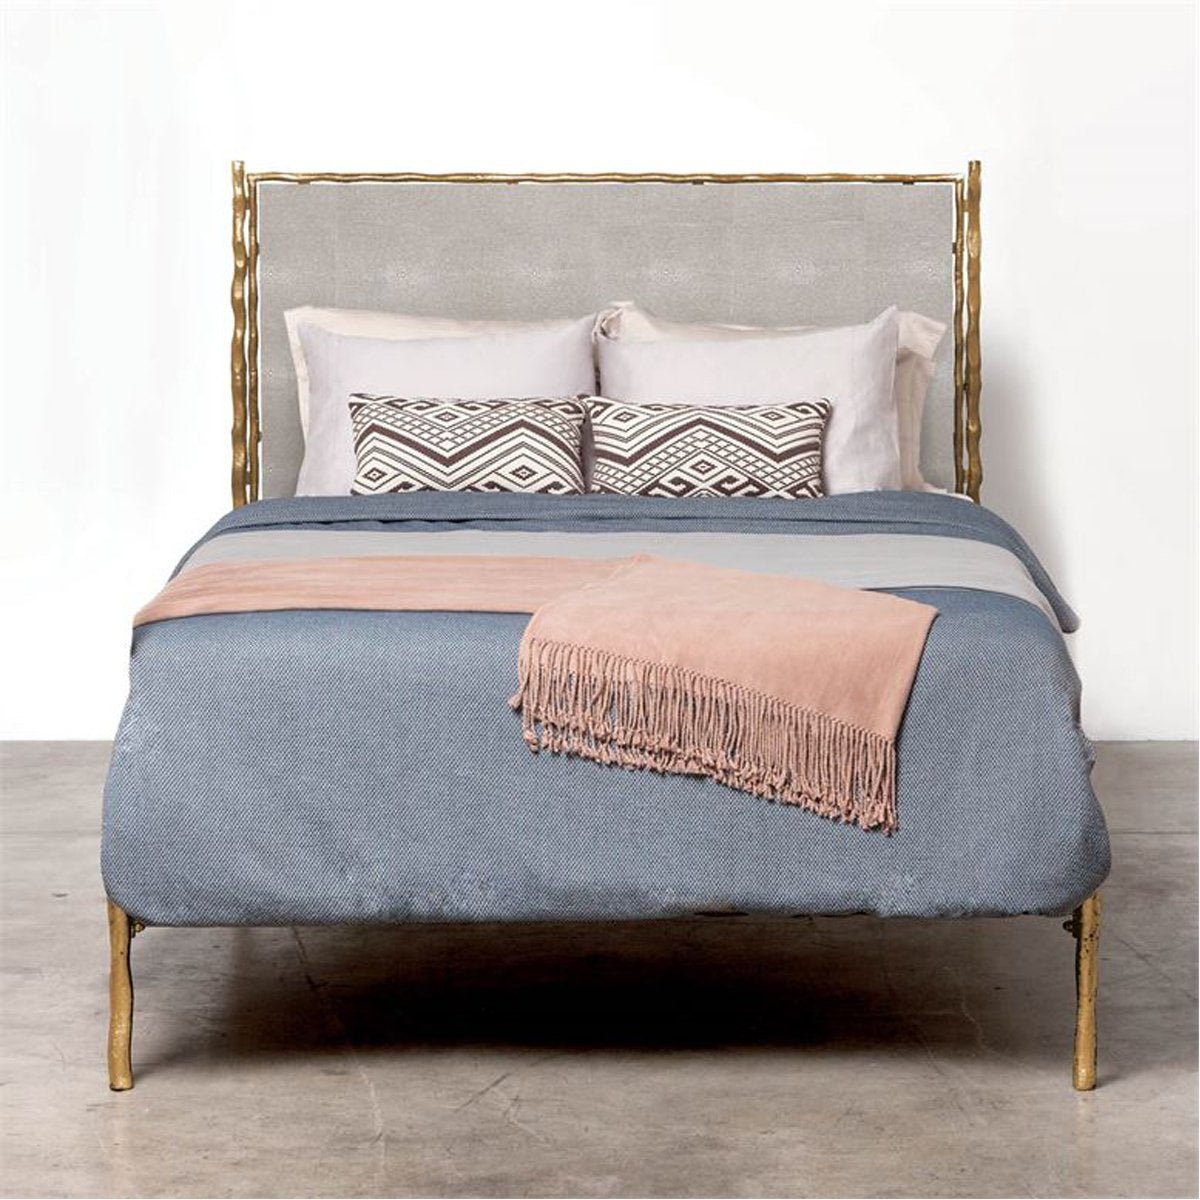 Made Goods Brennan Textured Bed in Nile Fabric